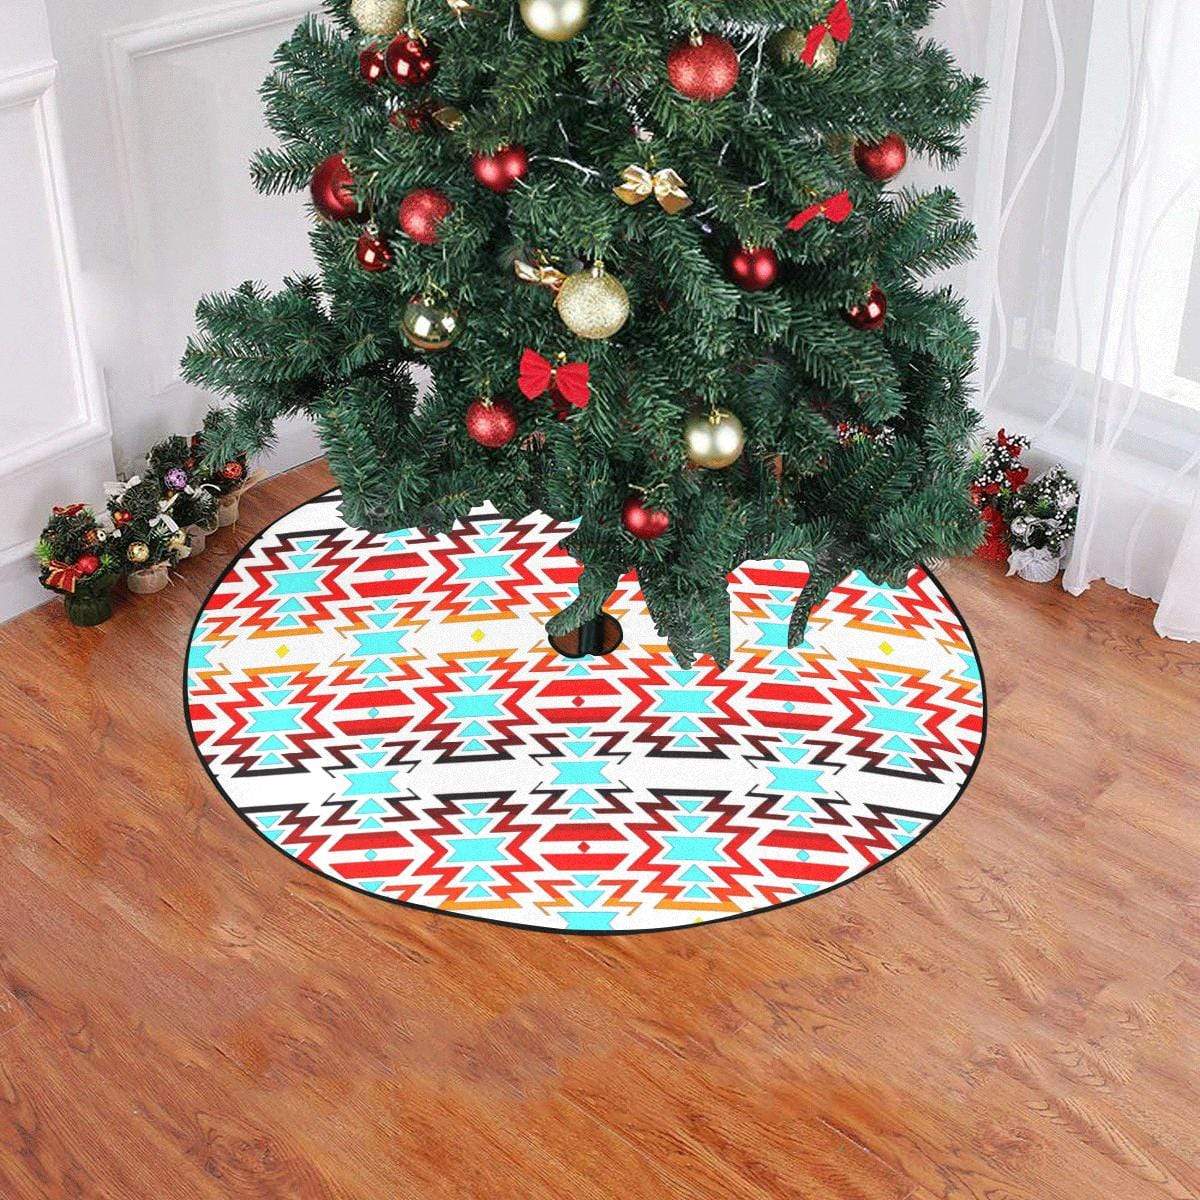 White Fire and Turquoise Christmas Tree Skirt 47" x 47" Christmas Tree Skirt e-joyer 